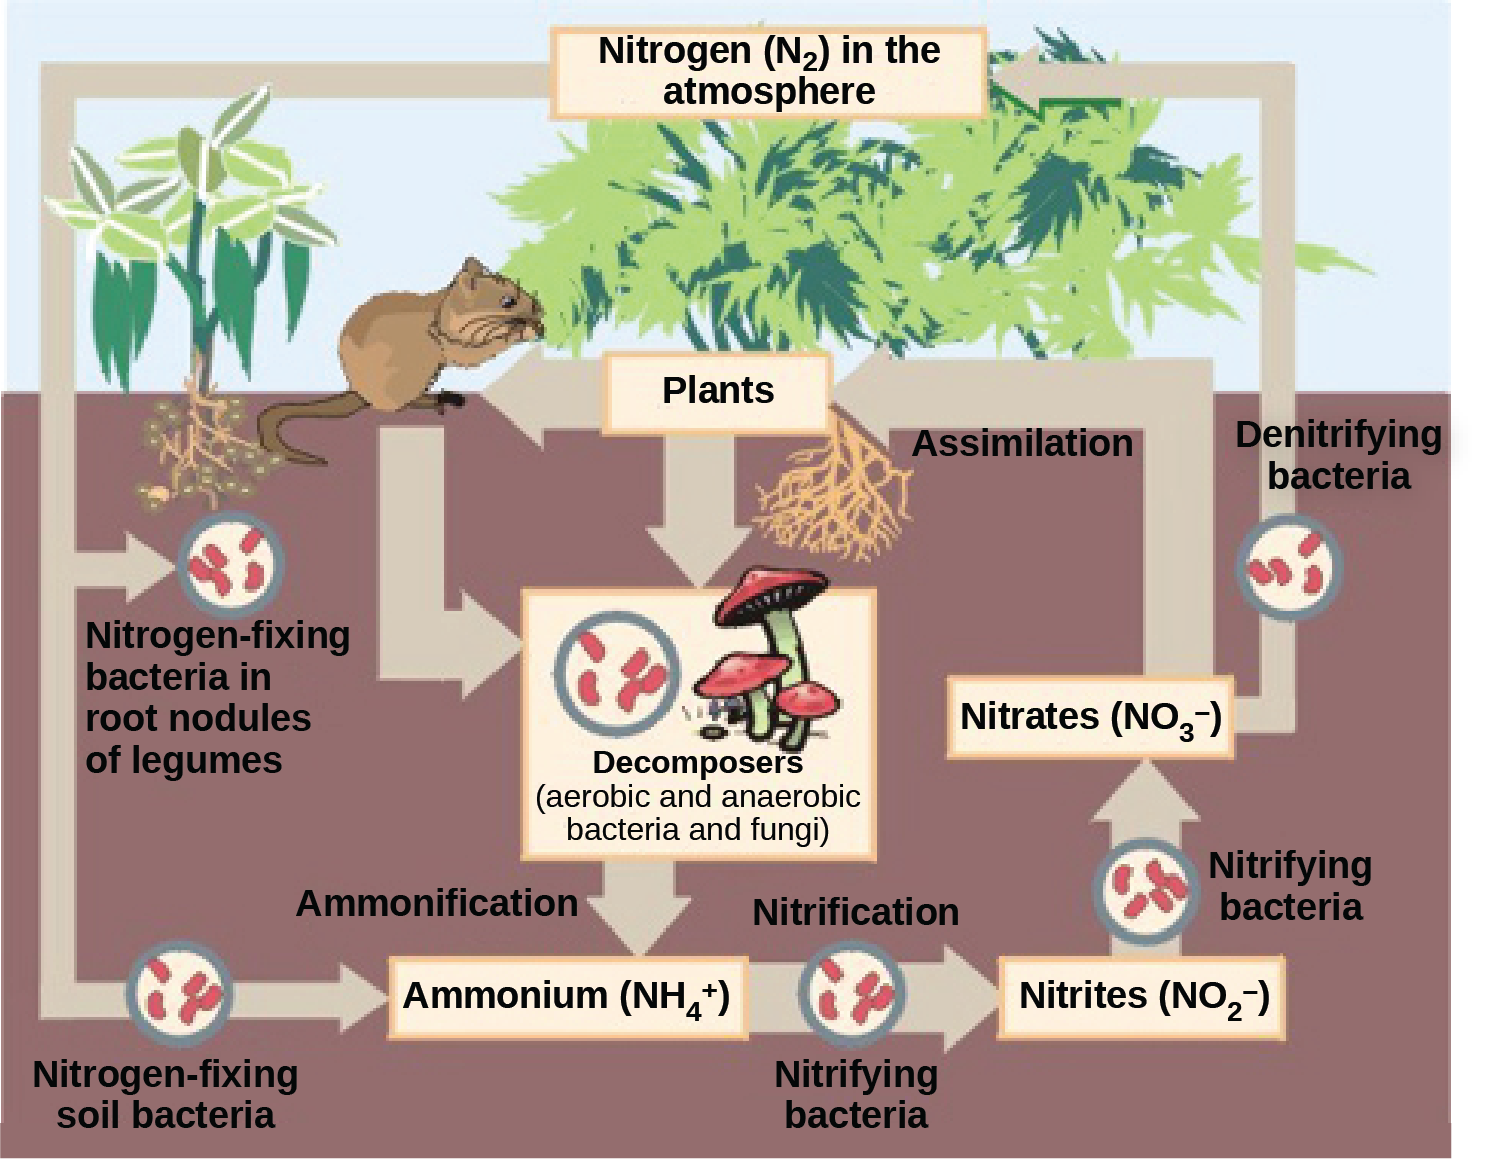 This illustration shows the role of bacteria in the nitrogen cycle. Nitrogen-fixing bacteria in root nodules of legumes convert nitrogen gas, or N2, into organic nitrogen found in plants. Nitrogen-fixing soil bacteria produce ammonium ion, or NH4+. Decomposers, including bacteria and fungi, decompose organic matter, also releasing NH4+. Nitrification is the process by which nitrifying bacteria produce nitrites (NO2-) and nitrates (NO3-). Nitrates are assimilated by plants, then animals, then decomposers. Denitrifying bacteria convert nitrates to nitrogen gas, completing the cycle.